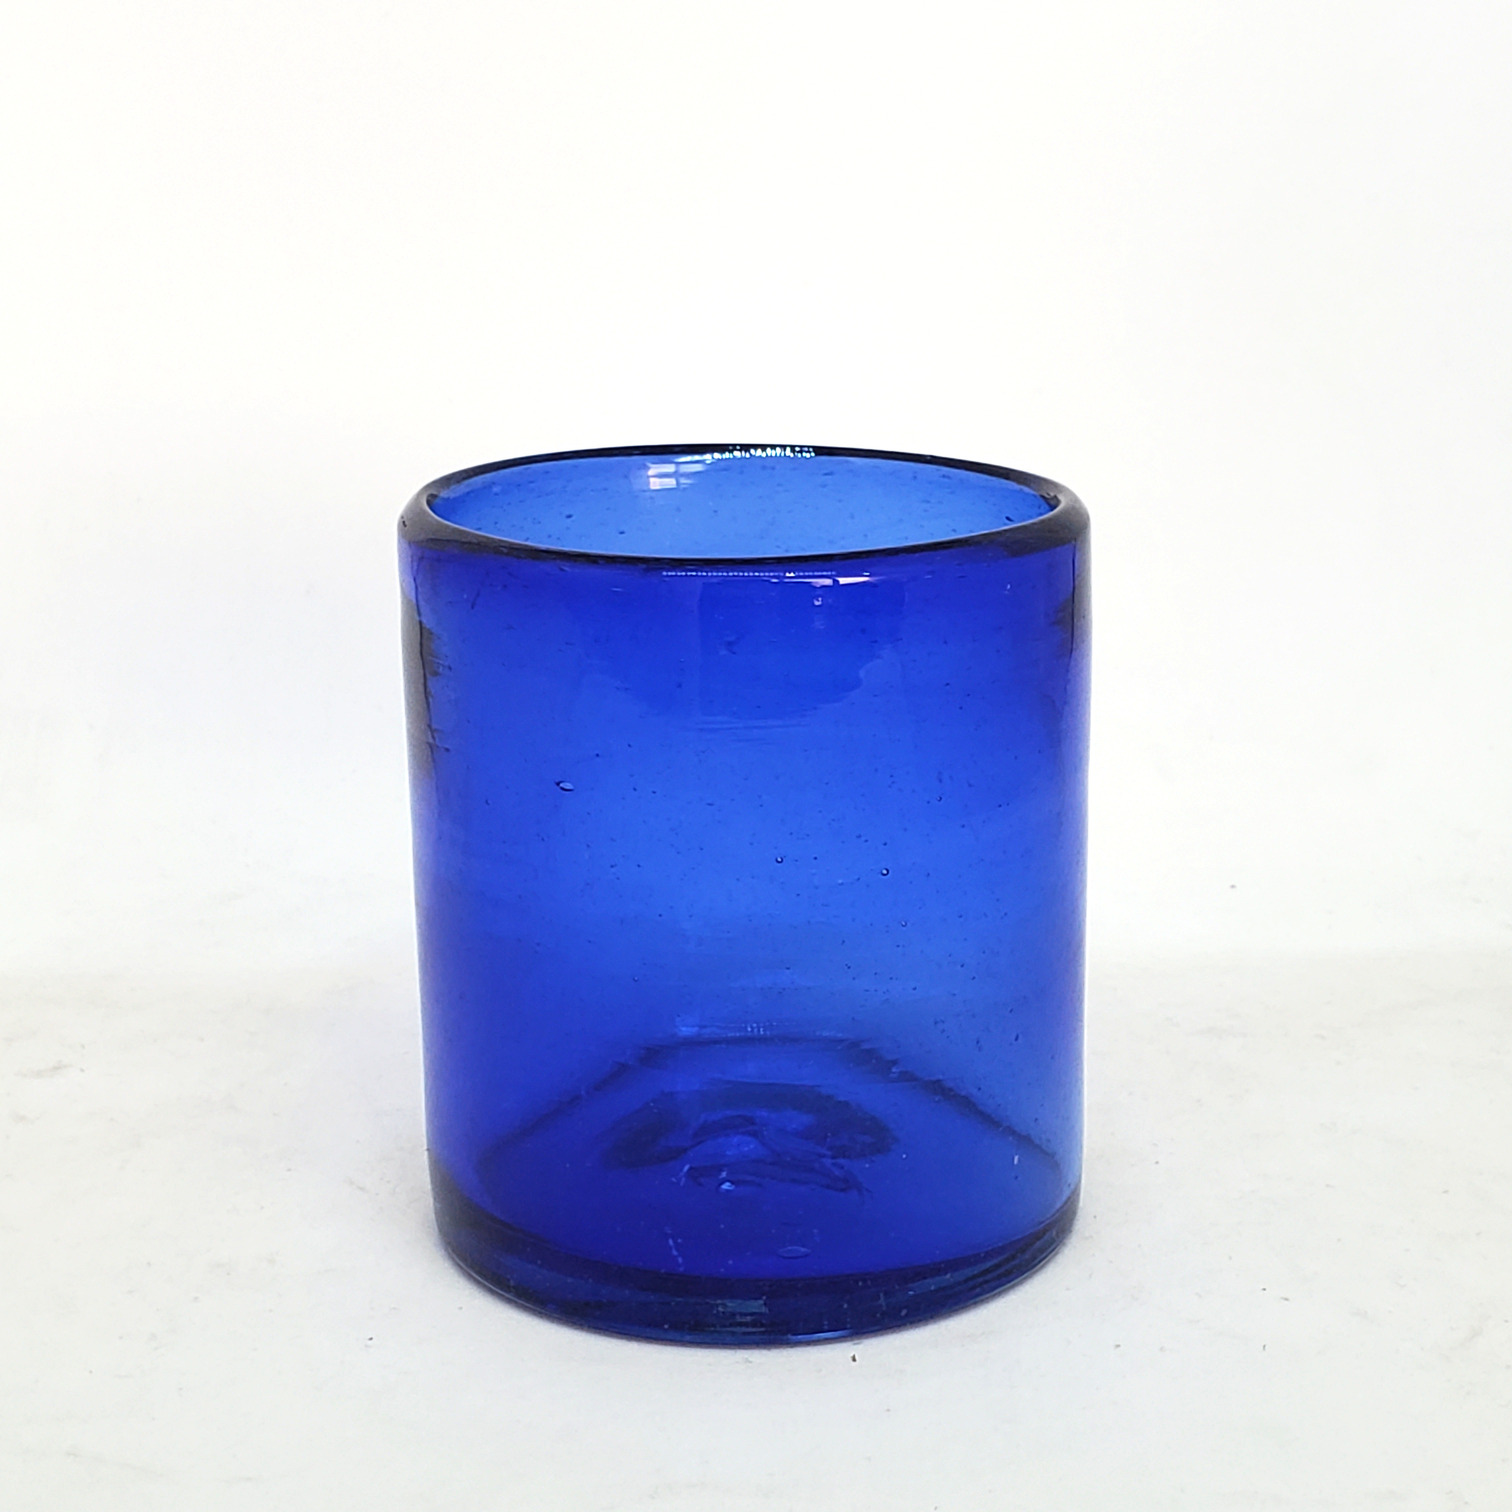 Wholesale Mexican Glasses / Solid Cobalt Blue 9 oz Short Tumblers  / Enhance your favorite drink with these colorful handcrafted glasses.